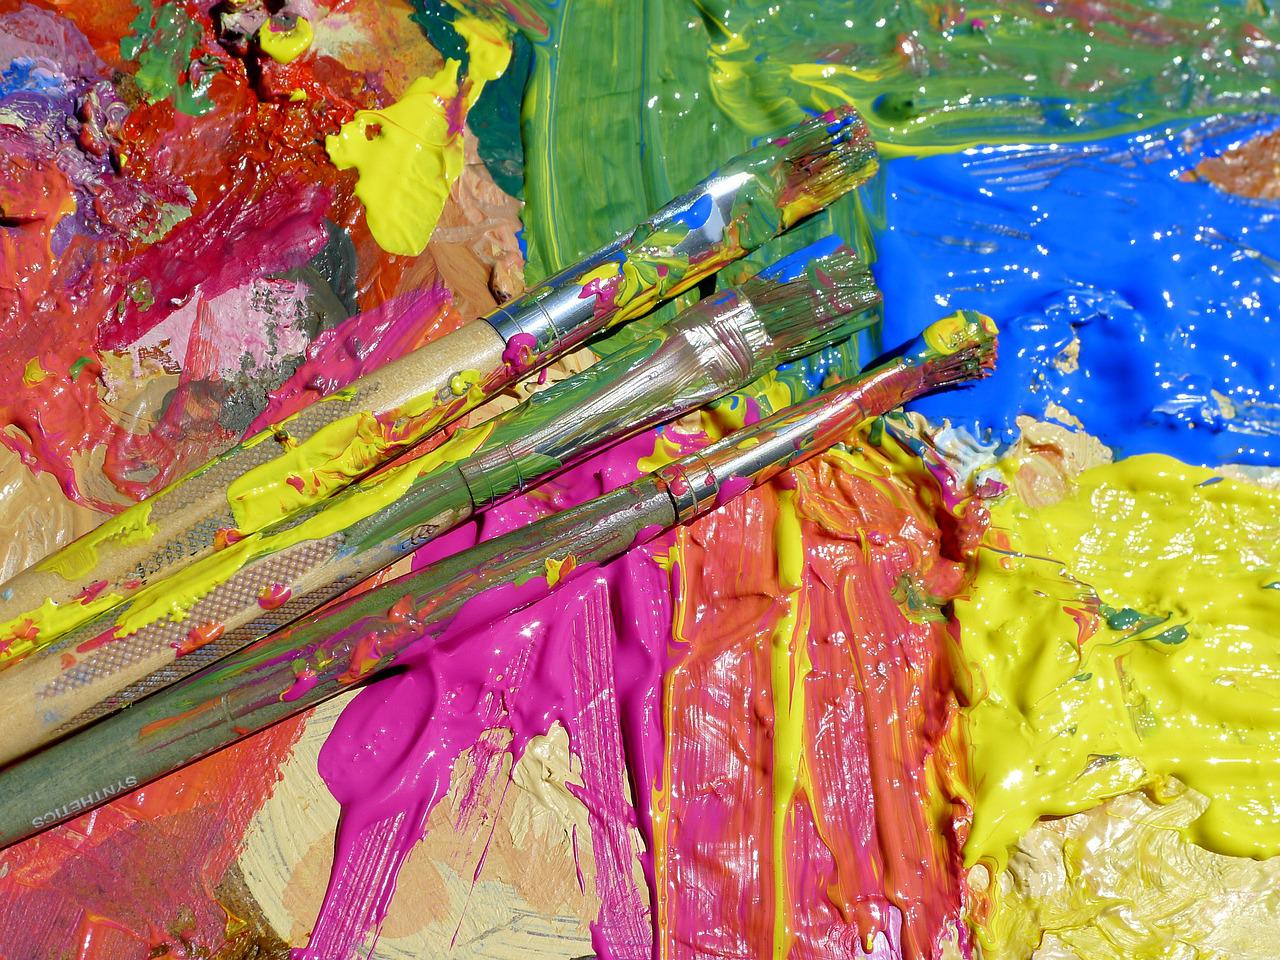 Paint brushes and paint in various colors